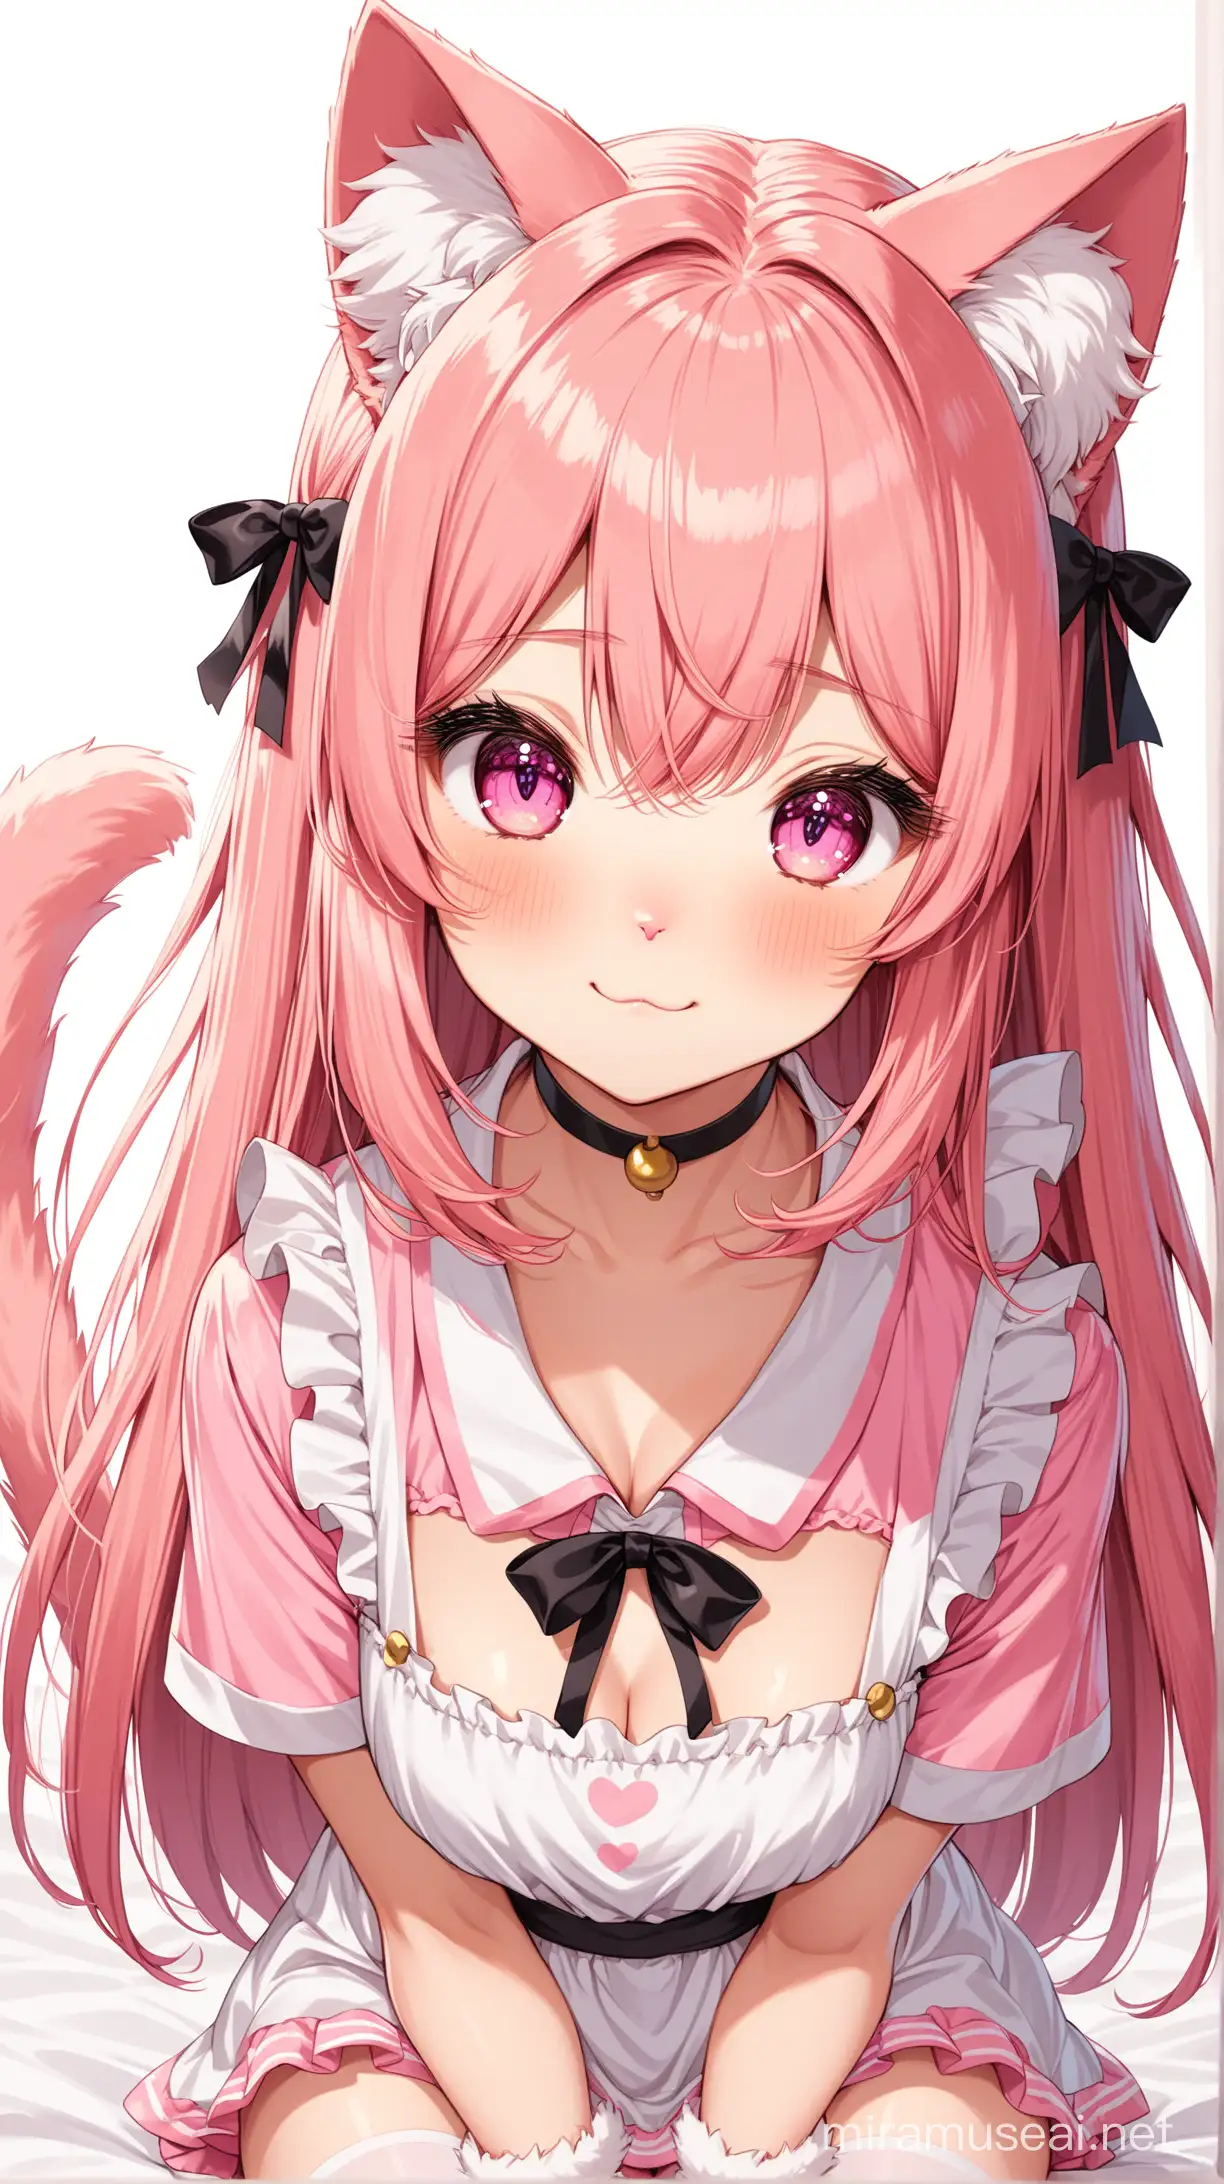 Cute Anime Cat Girl with Pink Fluffy Ears and Tail in Maid Uniform Looking at Viewer for Headpat